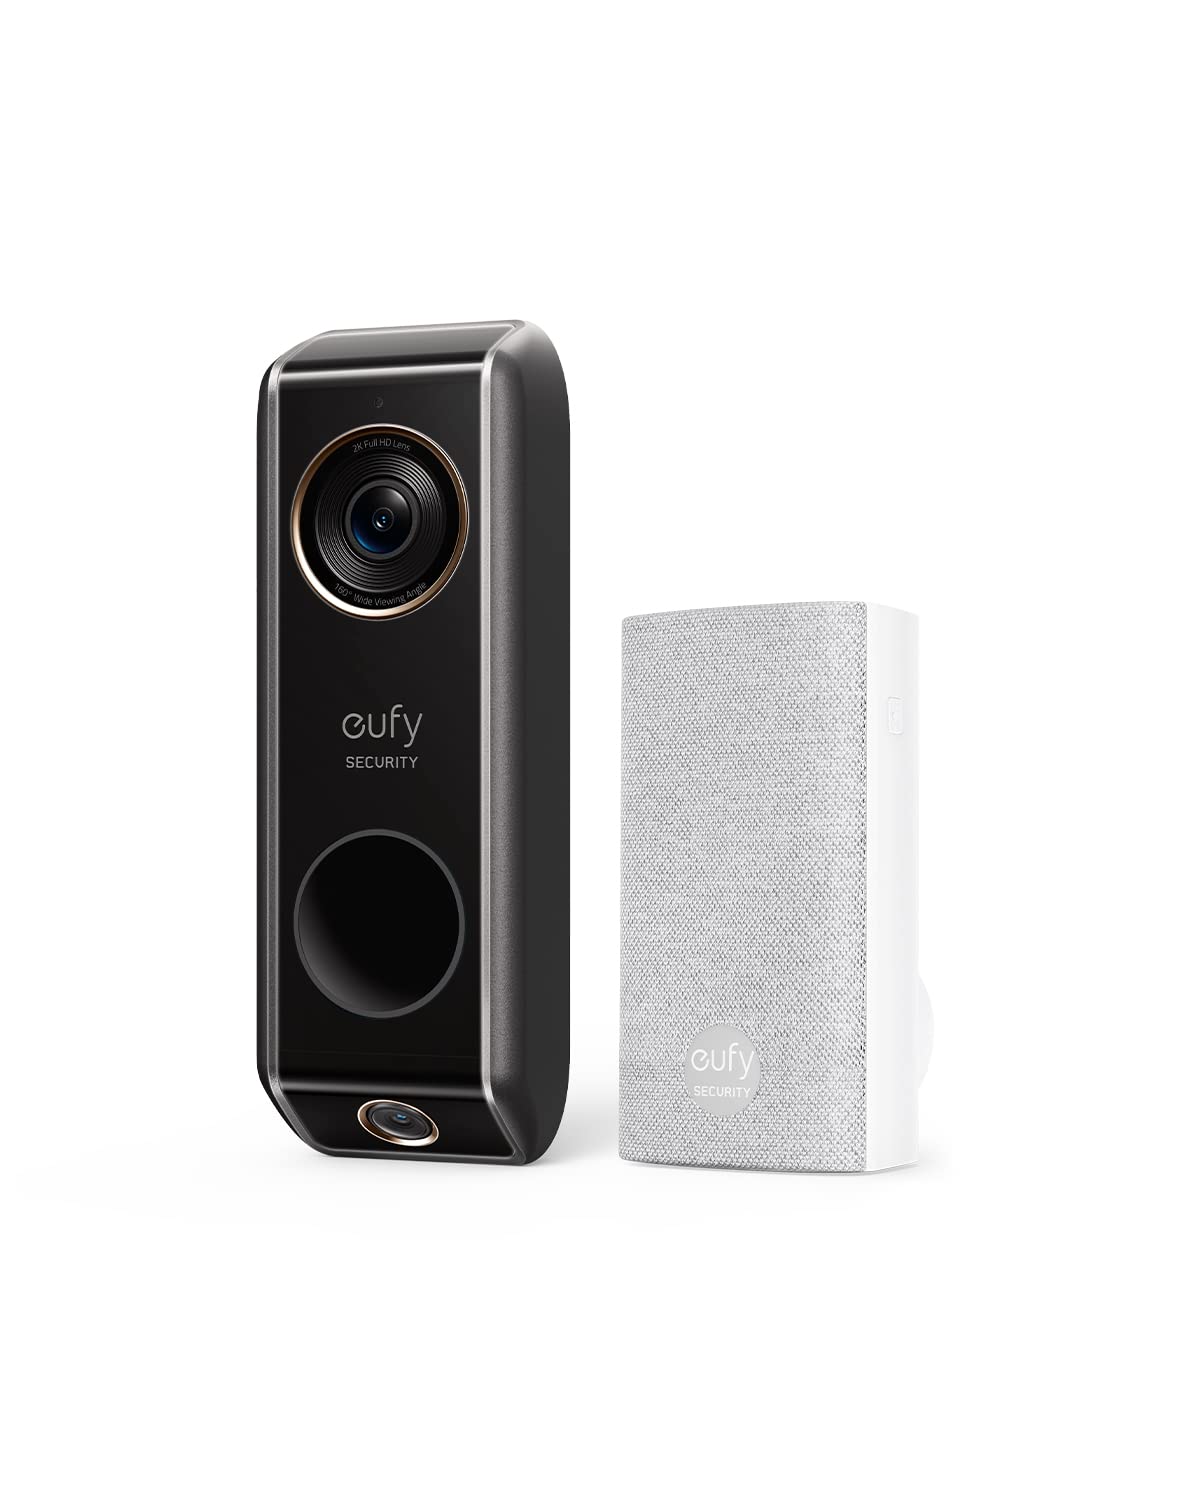 eufy Security S330 Video Doorbell (Wired) with Chime, Dual Cam, Delivery Guard, 2K with HDR, No Monthly Fee, 16-24V, 30VA, homebase NOT Supported $129